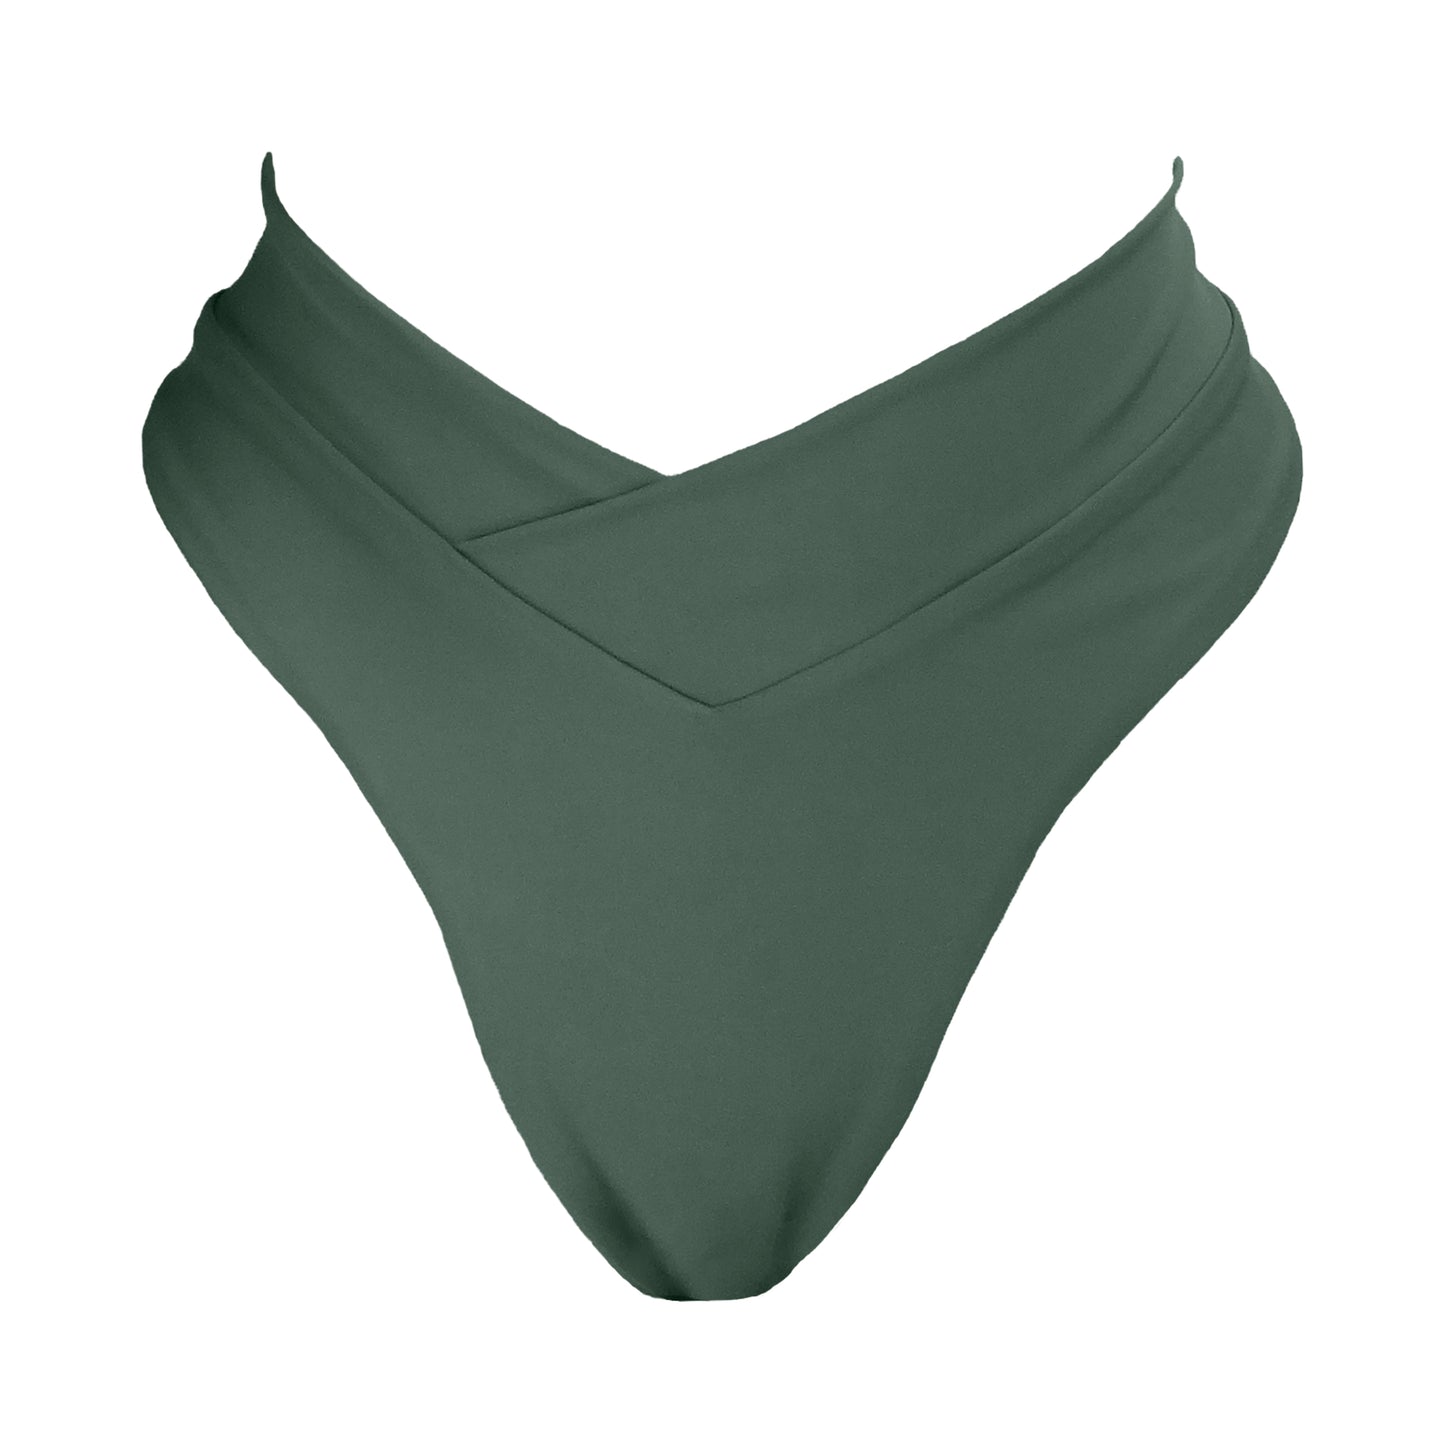 Sage Green v-front high rise bikini bottom with a cross front waist brand to accentuate curves, high cut legs and full coverage.